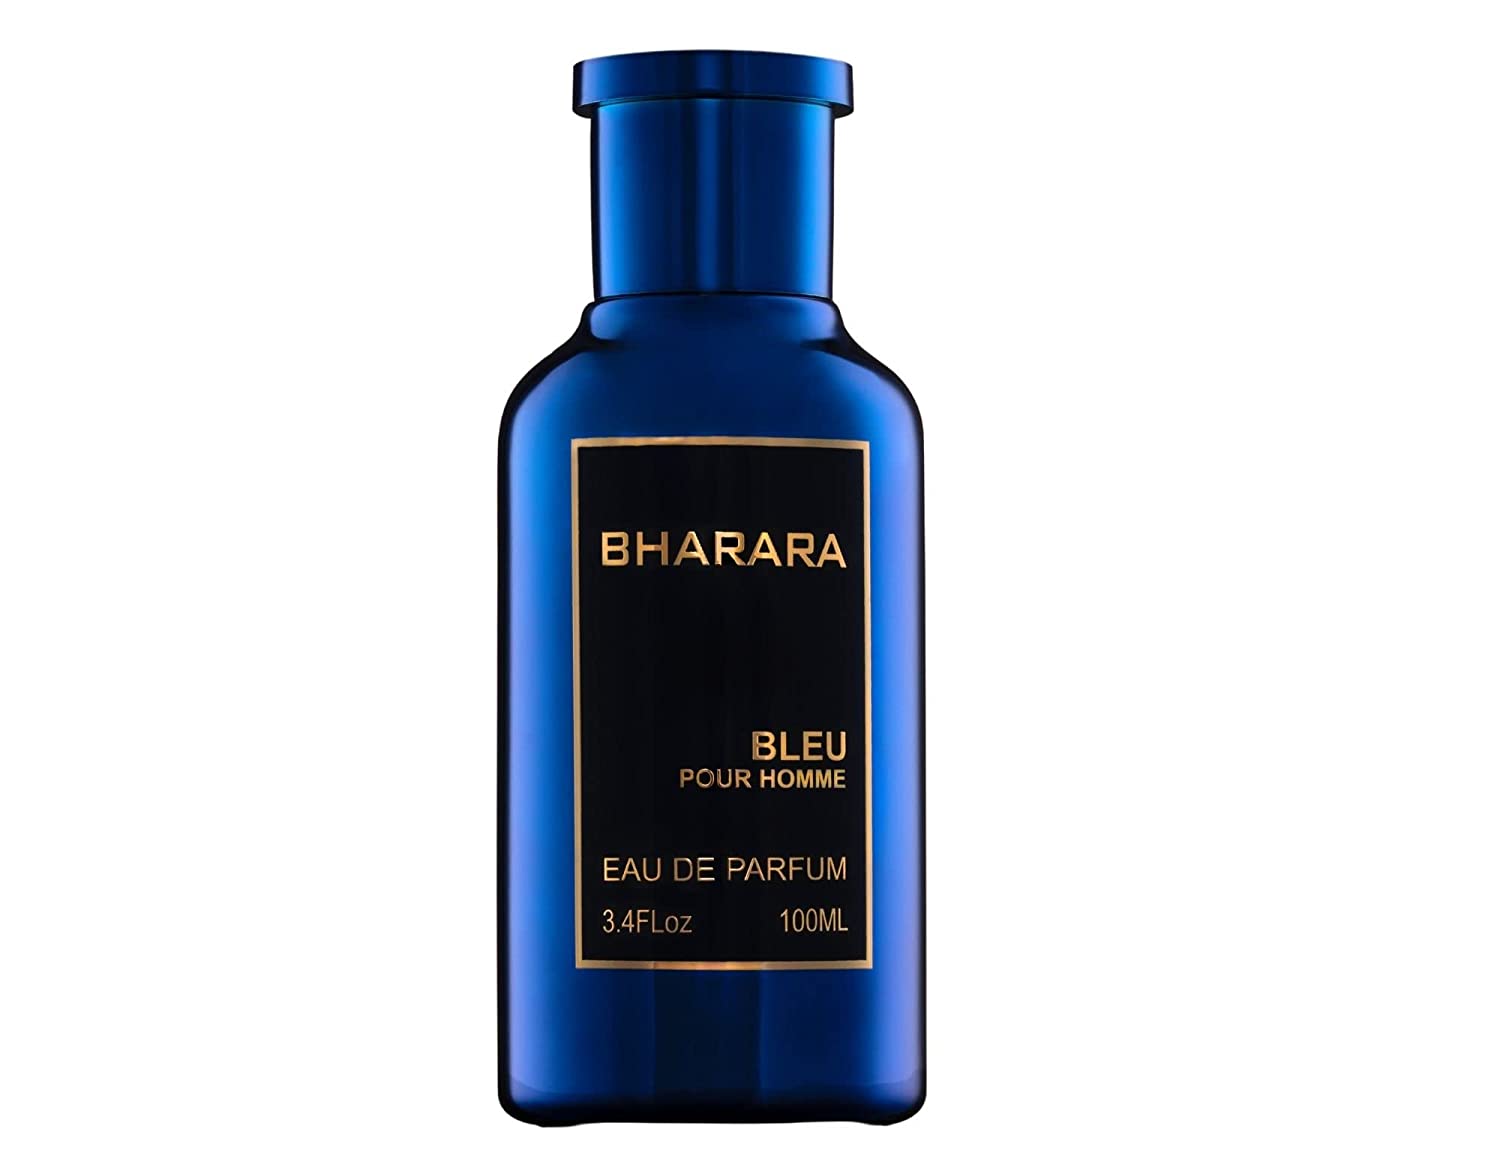 Champagne Blue Bharara cologne - a new fragrance for men 2022